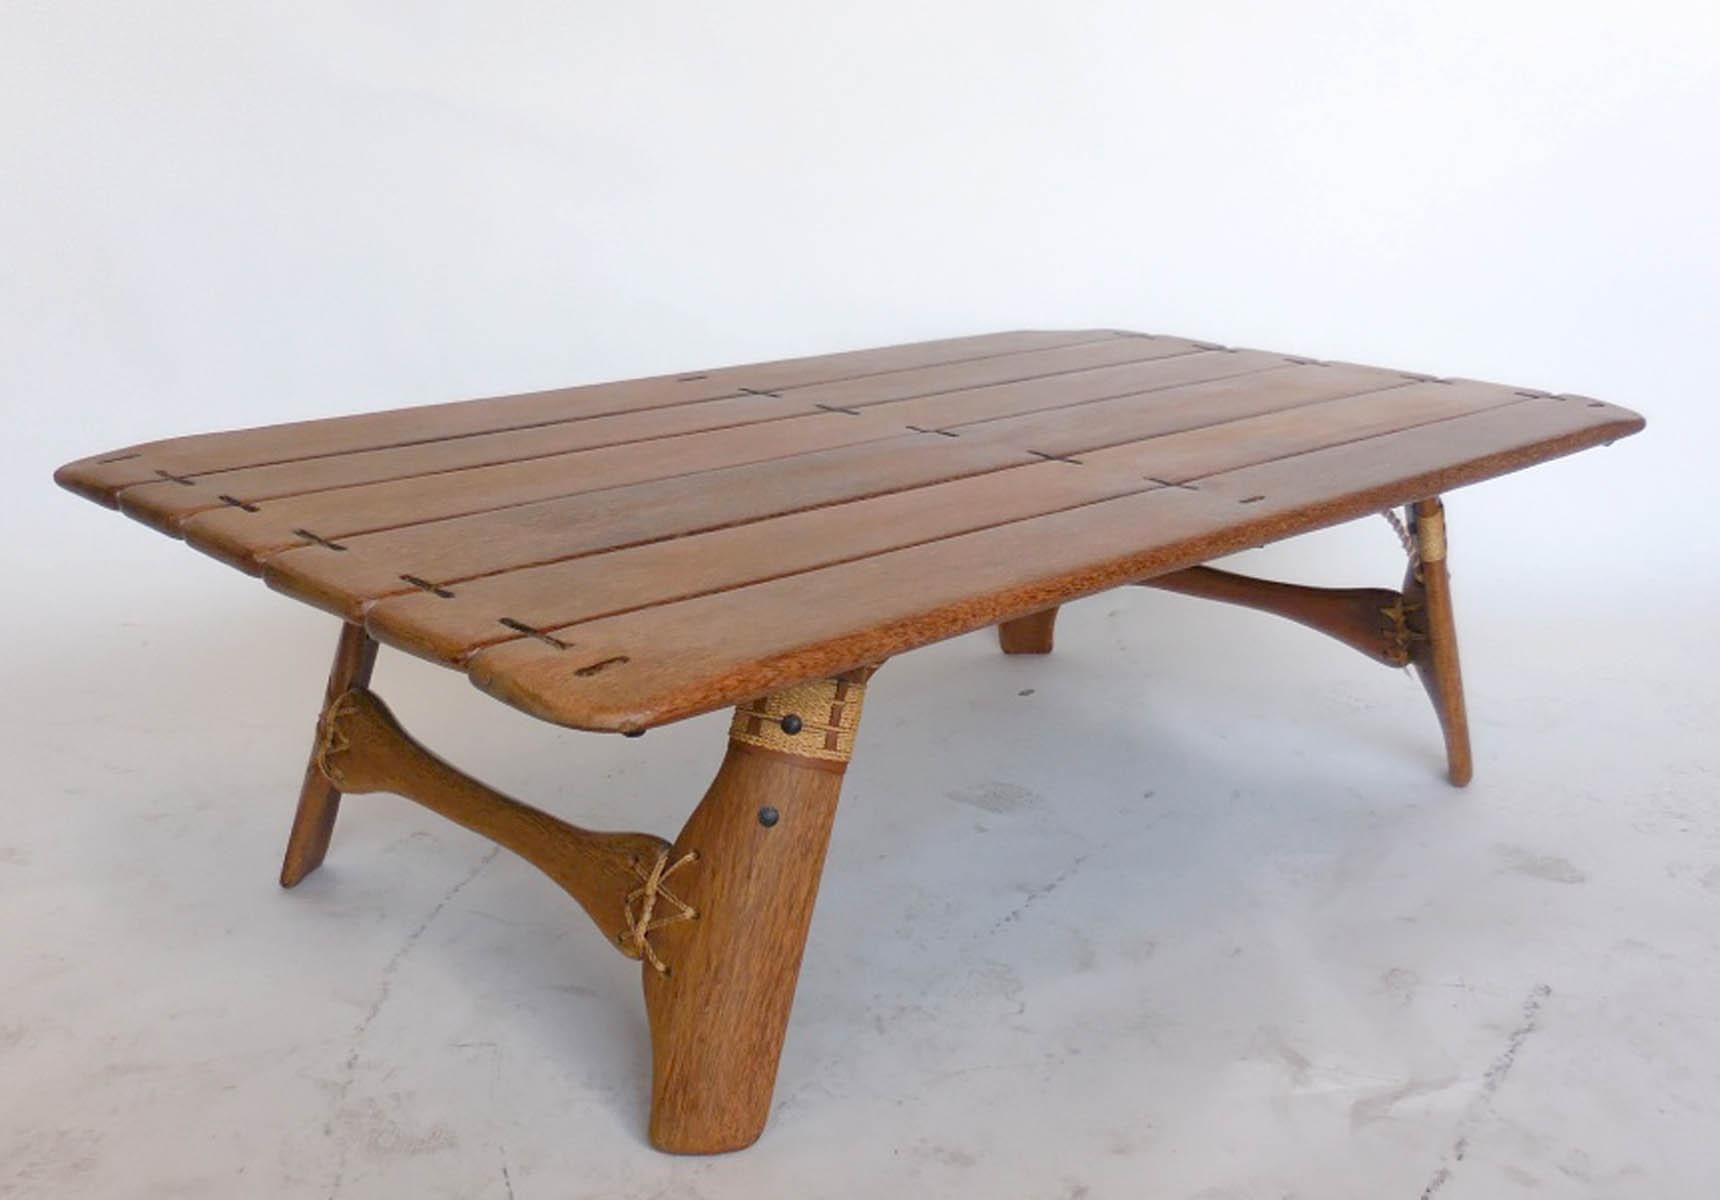 This coffee table made in Australia, in the 1990s. Constructed of palm wood and leather and rope. In very good condition. Beautiful variegated colors throughout sustainable tropical palm wood. Great patina! Interesting construction and side view is